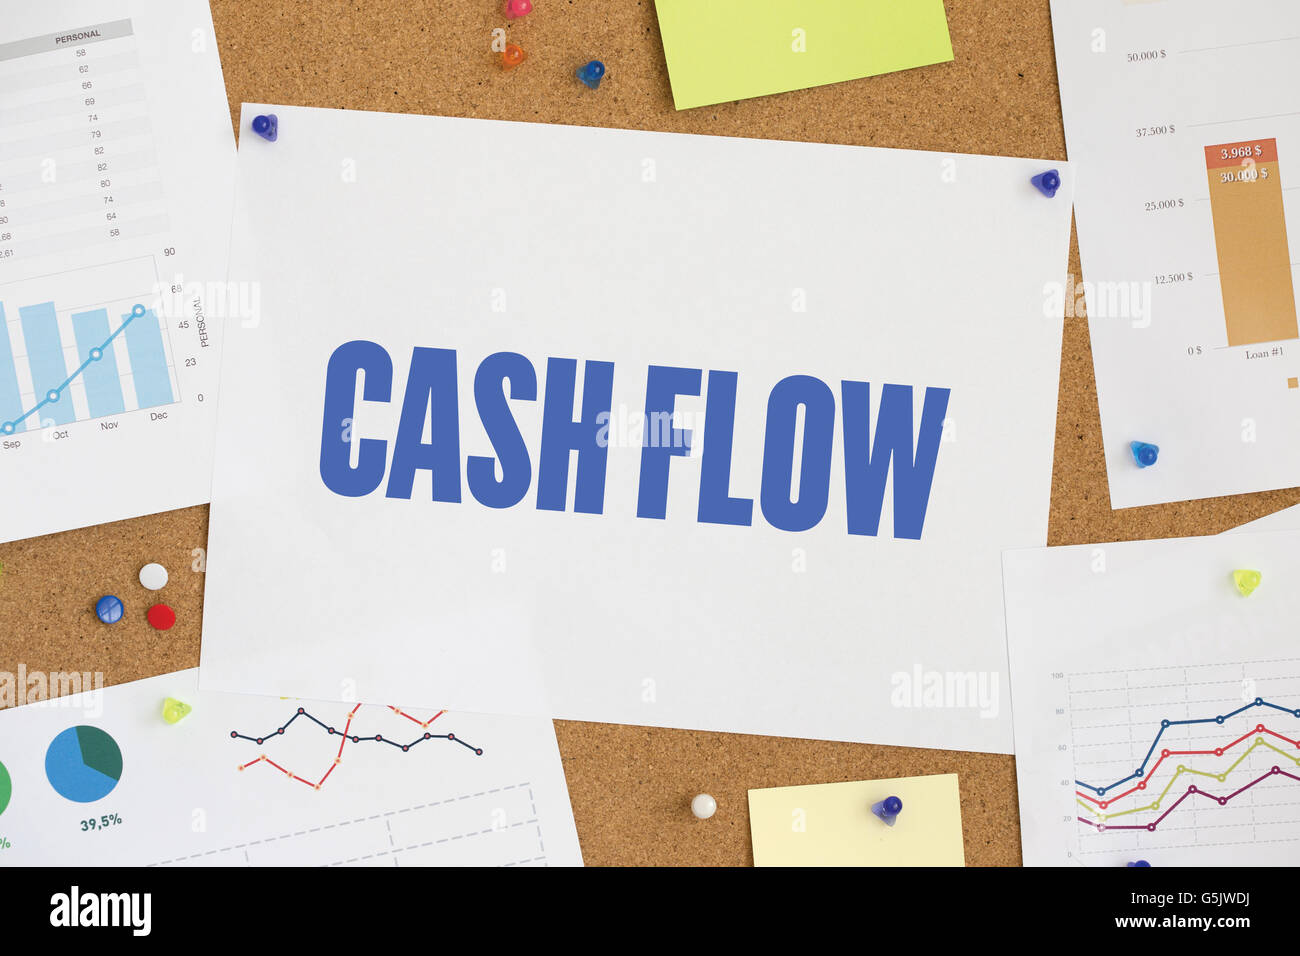 CHART BUSINESS GRAPH RESULT COMPANY CASH FLOW CONCEPT Stock Photo